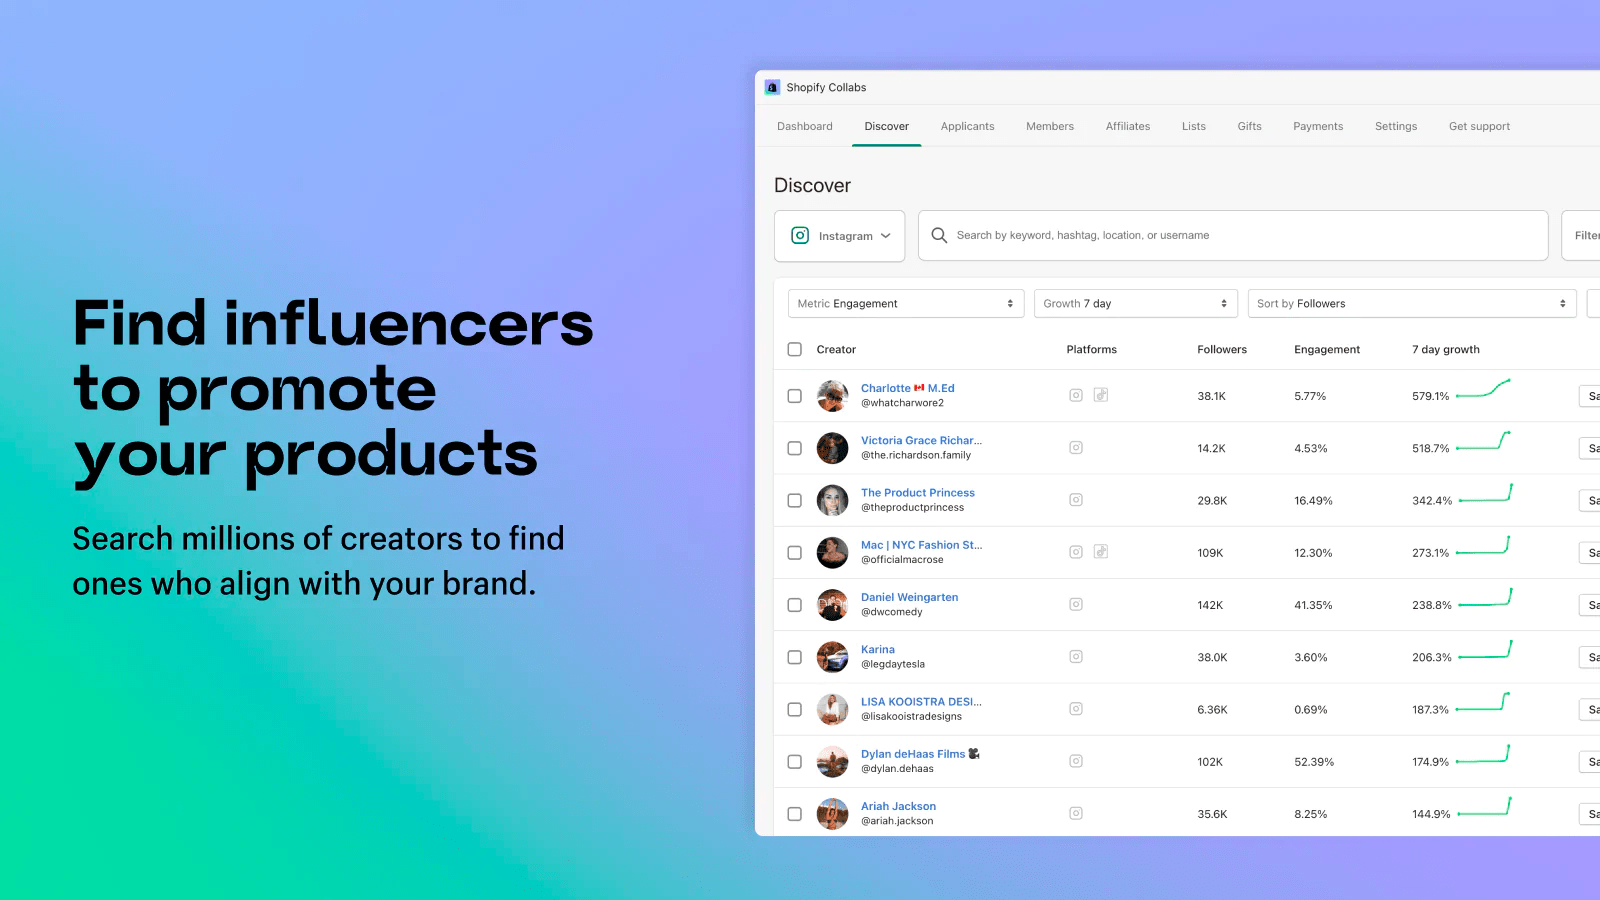 Screenshot of Shopify Collabs, which says "Find influencers to promote your products" and shows a database of potential collaboration partners.